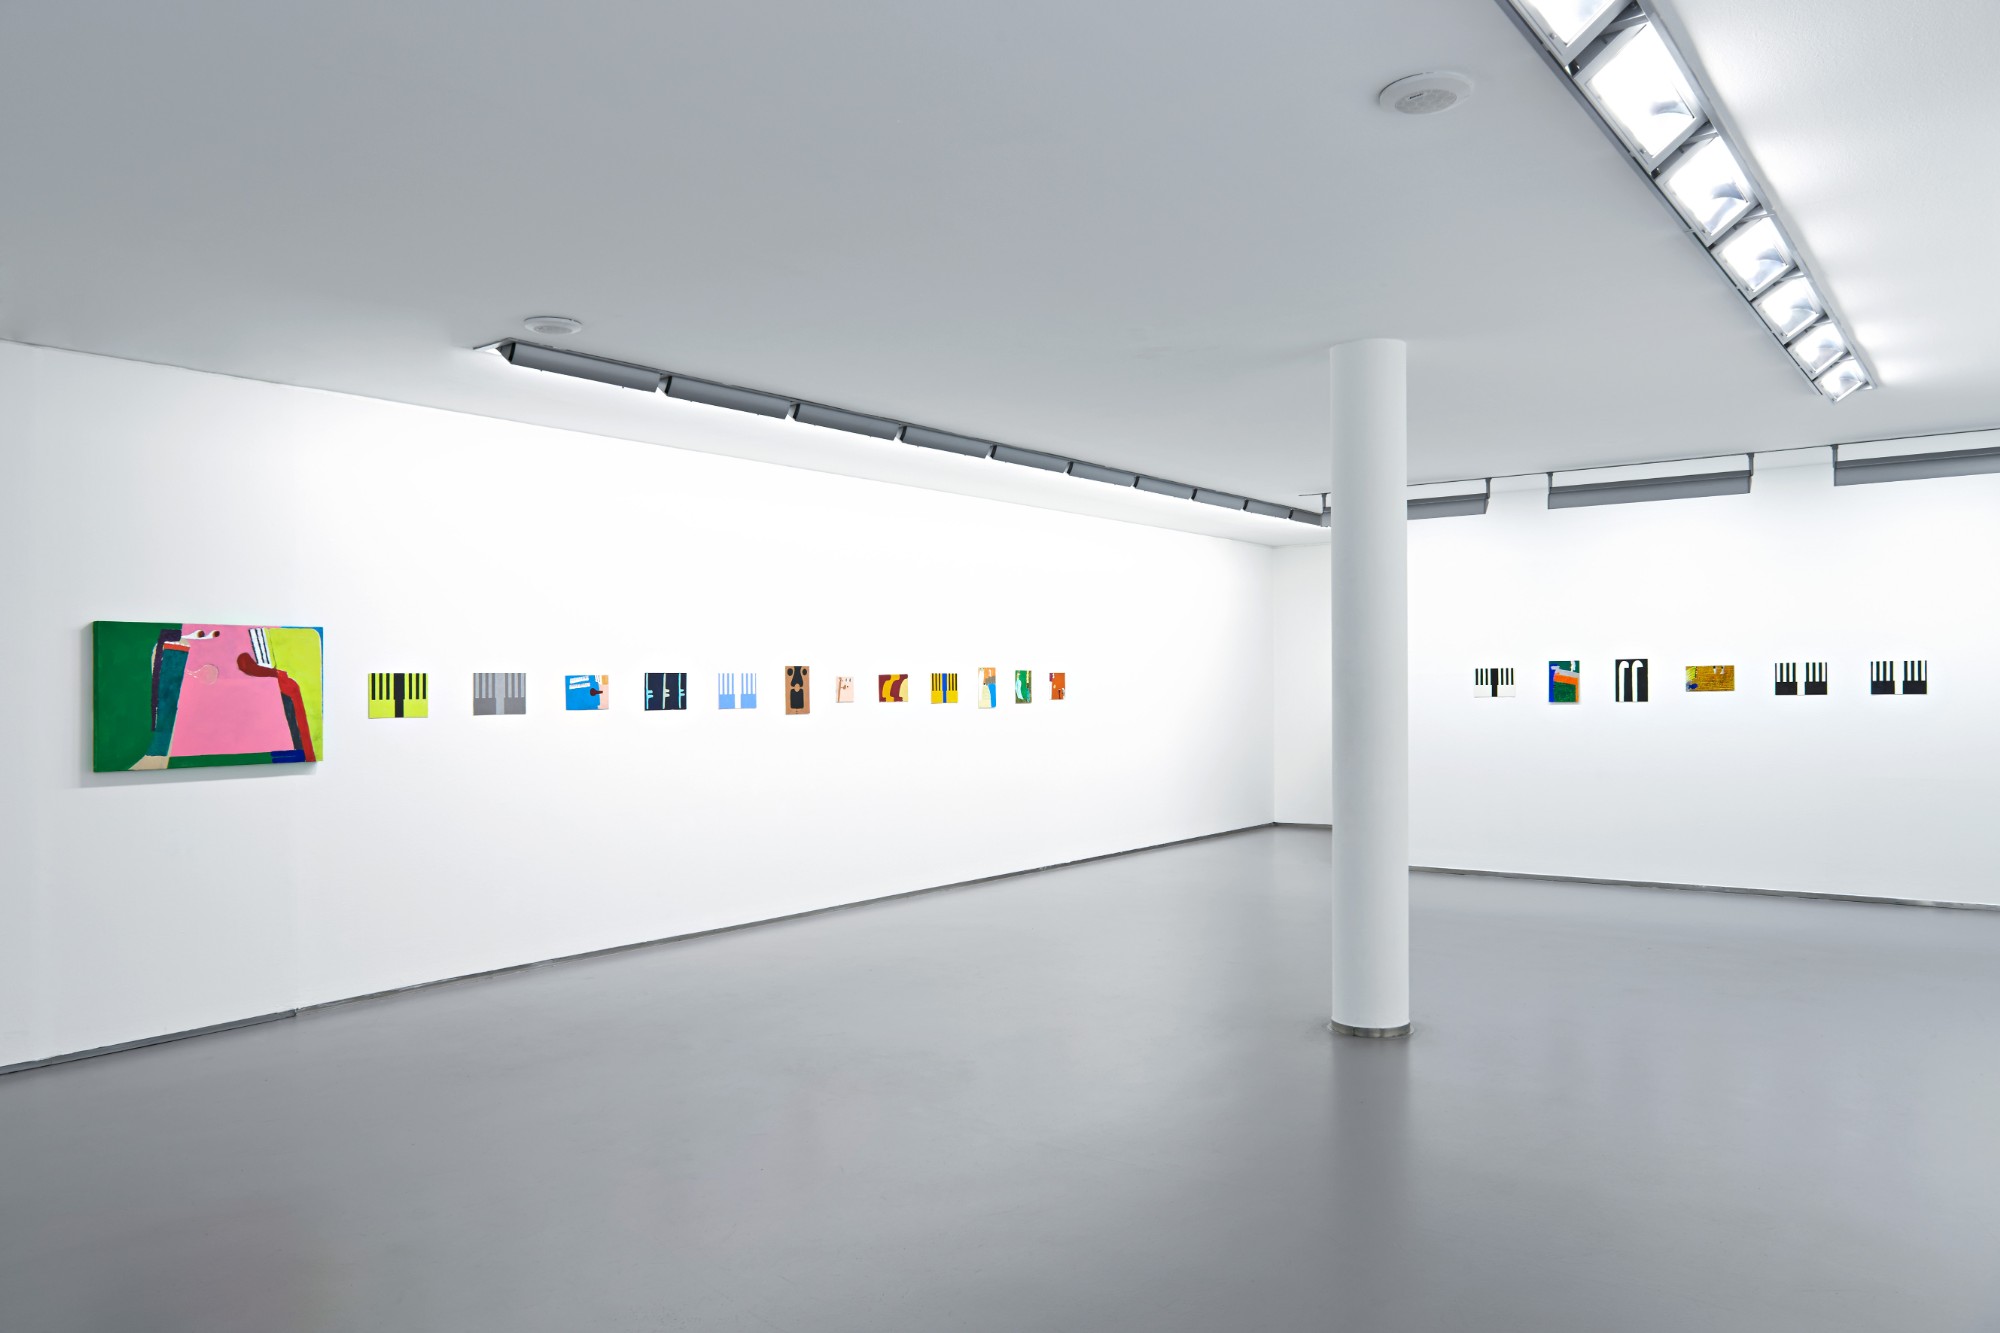 Ulrich Wulff, PQRS, Exhibition view, 2018